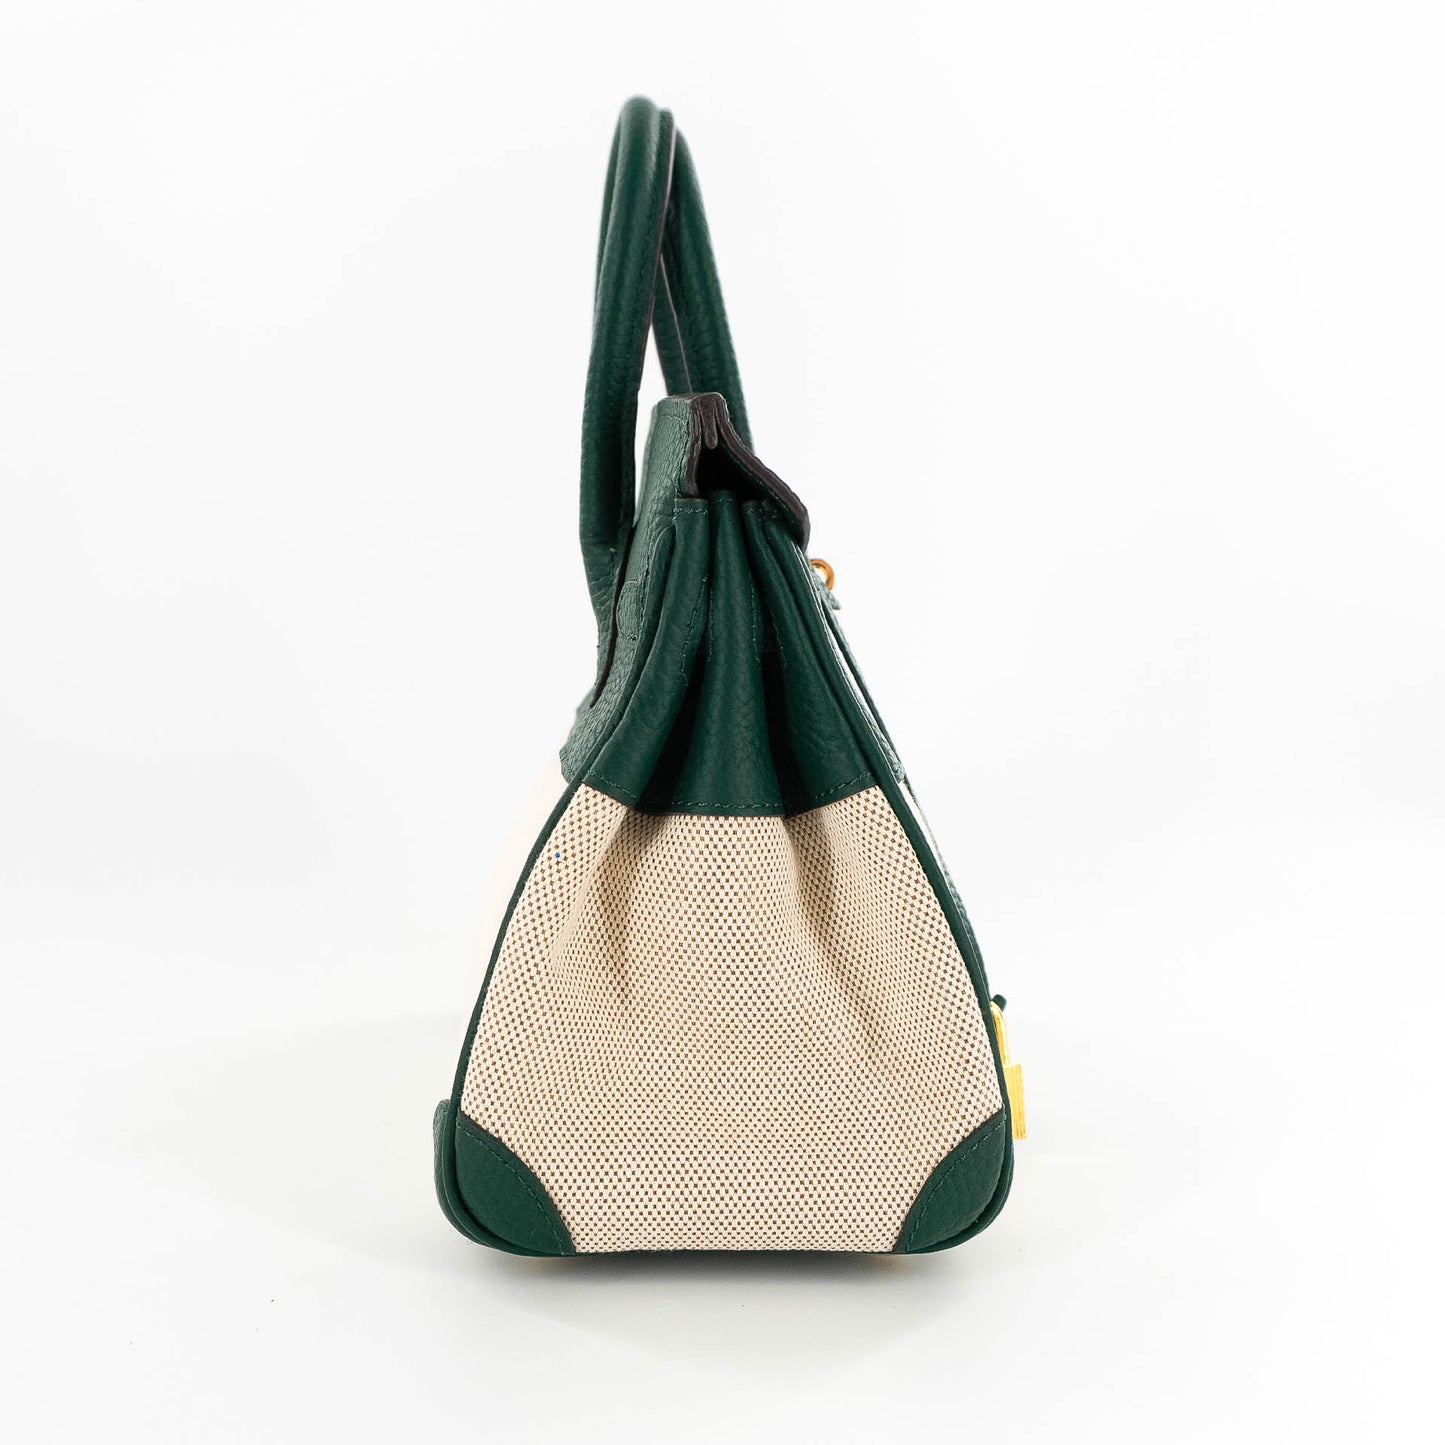 Duchess Handbag in Linen and Green Leather